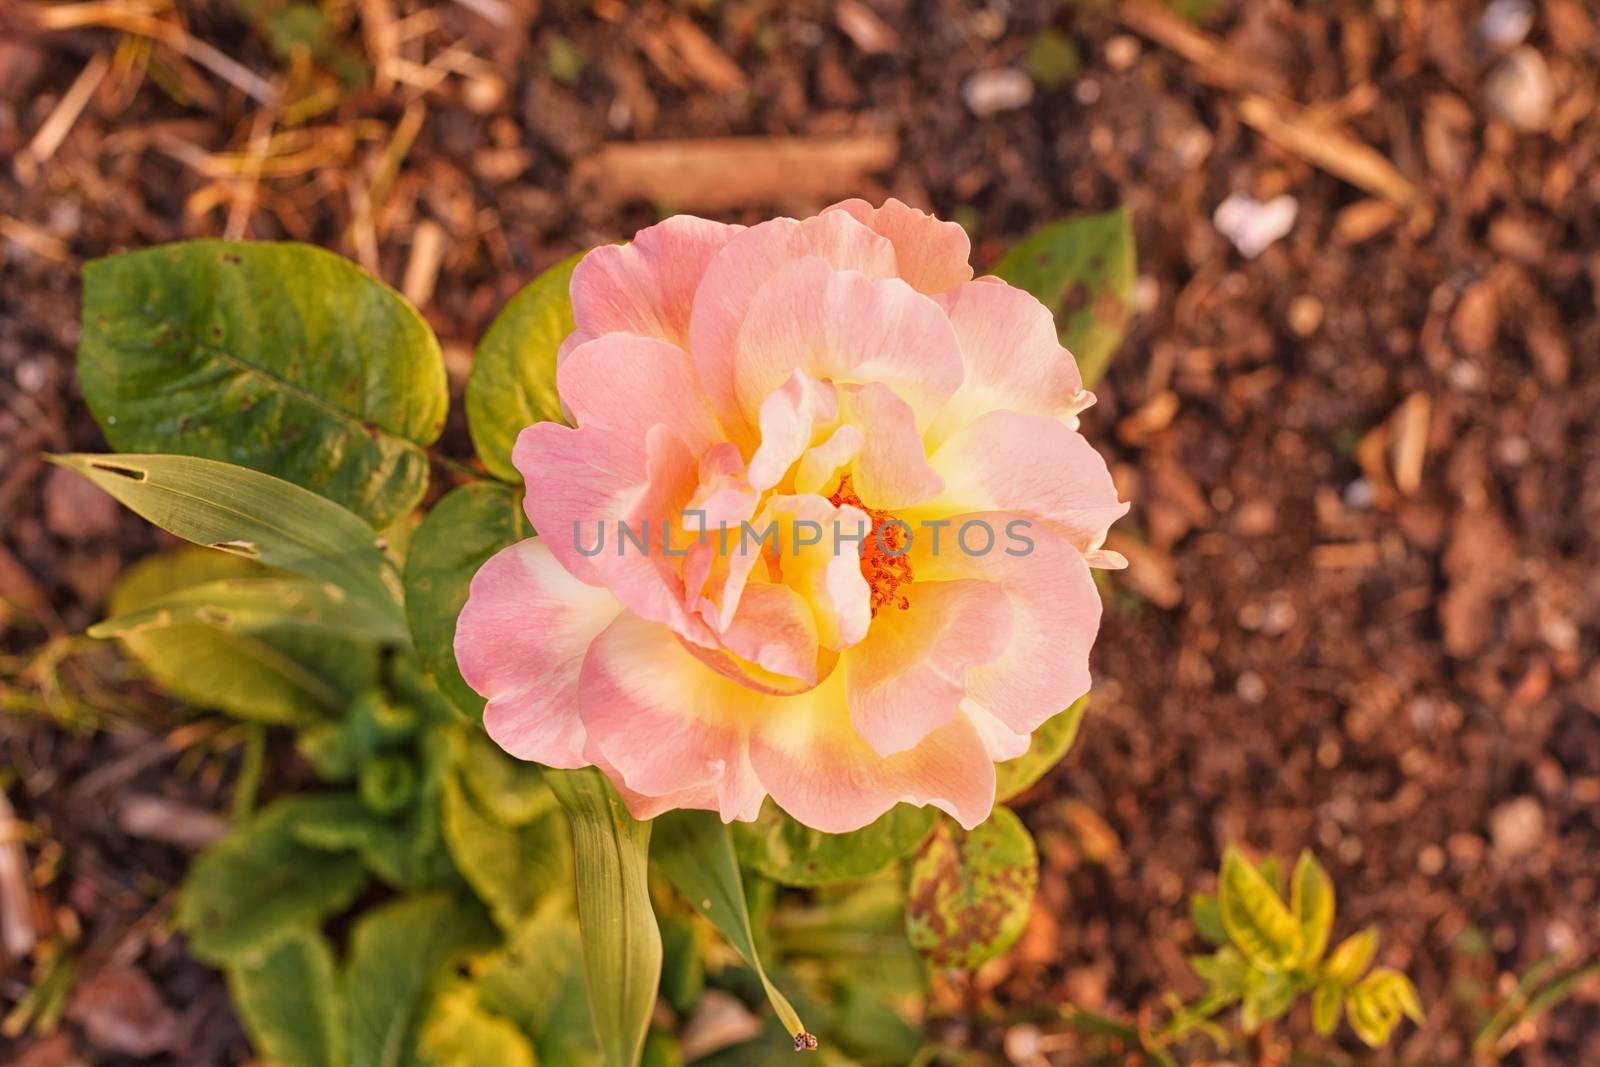 Variegated pink and yellow rose by STphotography